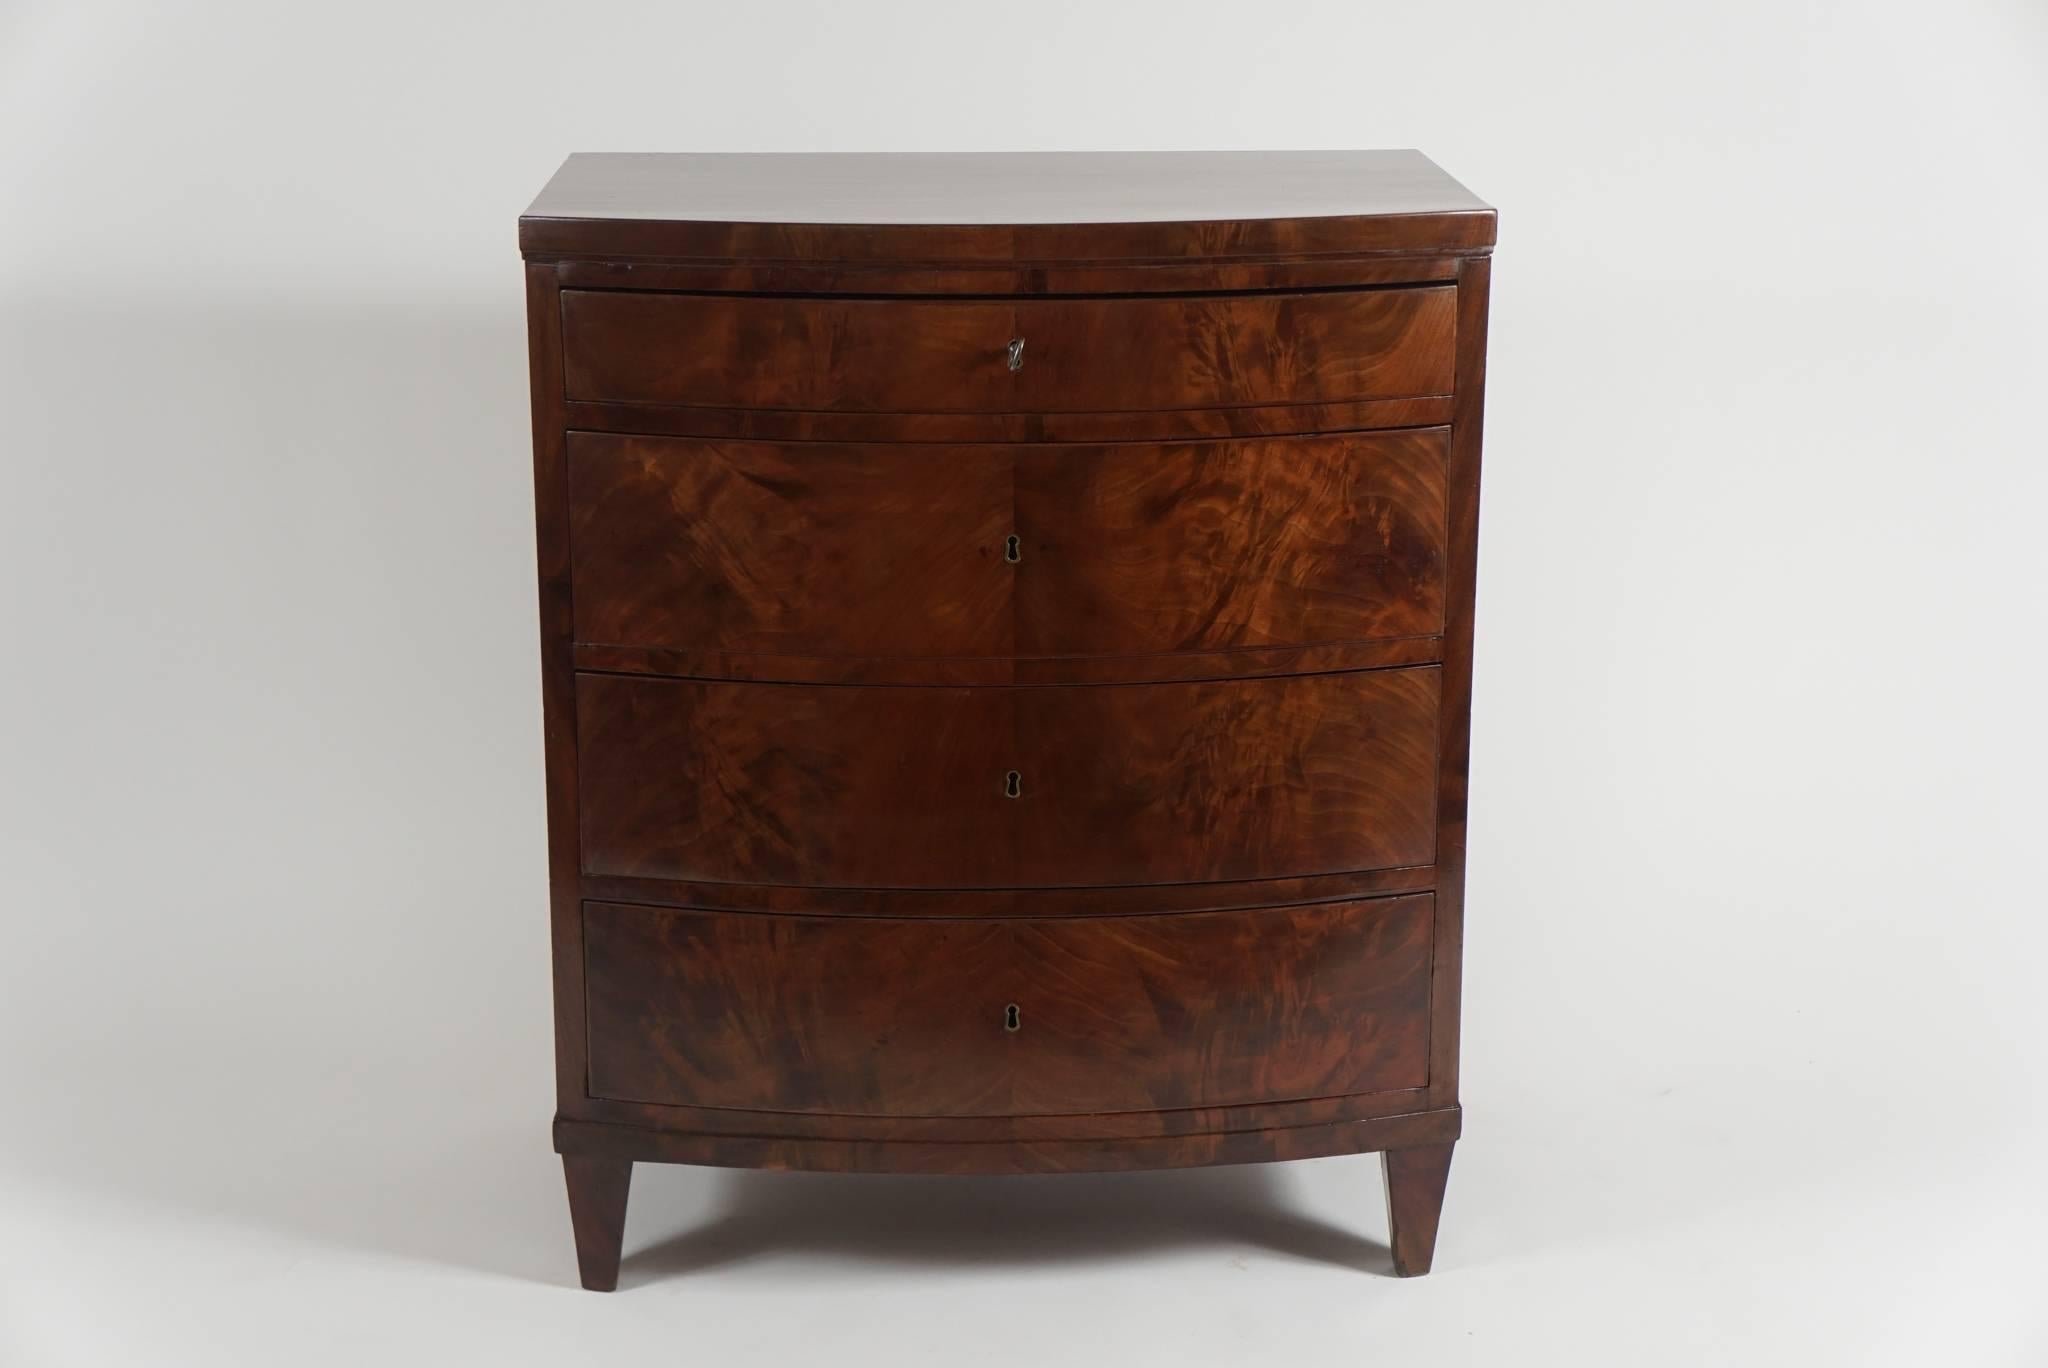 An elegant, richly grained mahogany bachelor's chest or petite commode, of bow front form and clean design having four drawers with central locks on four tapered supports. Considered 'Empire' due date of construction and the luxurious use of